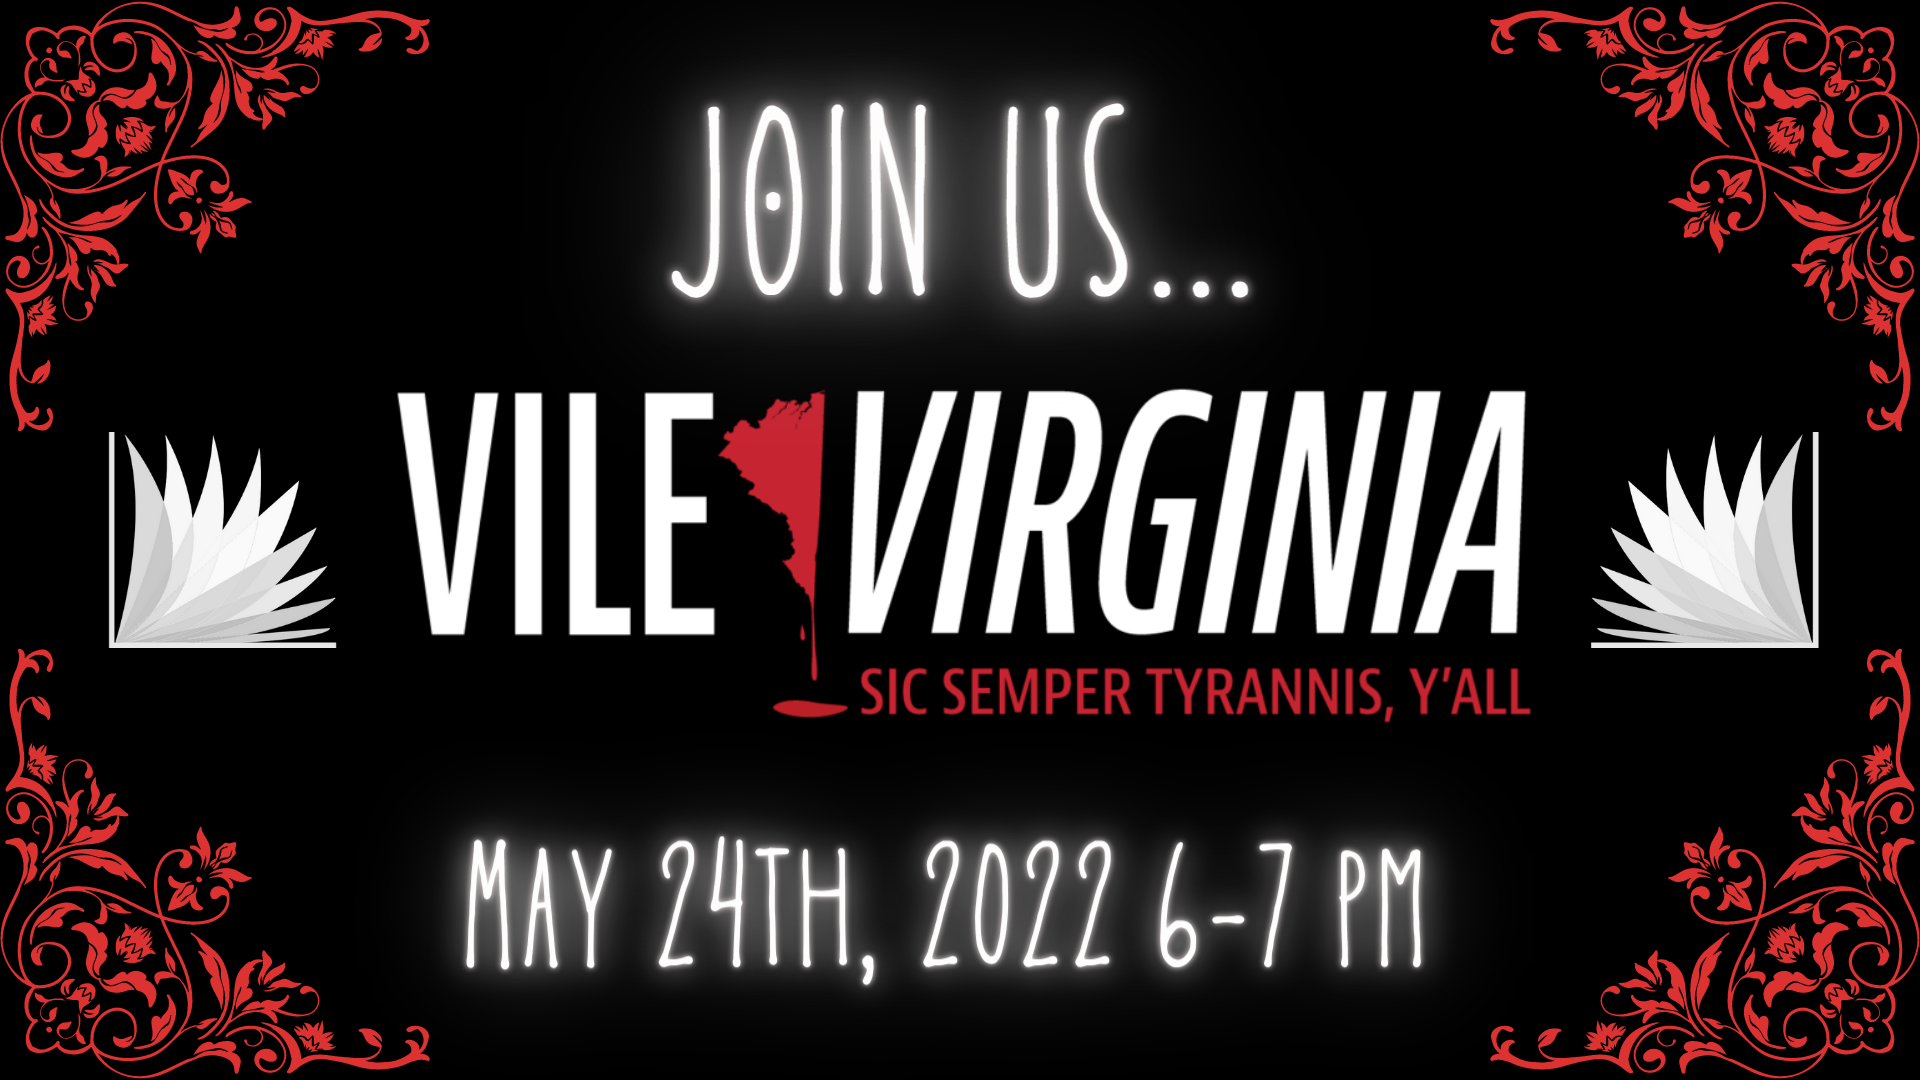 Join Us..., Vile Virginia, Sic Semper Tyrannis, Y'all, May 24th, 2022 6-7 pm